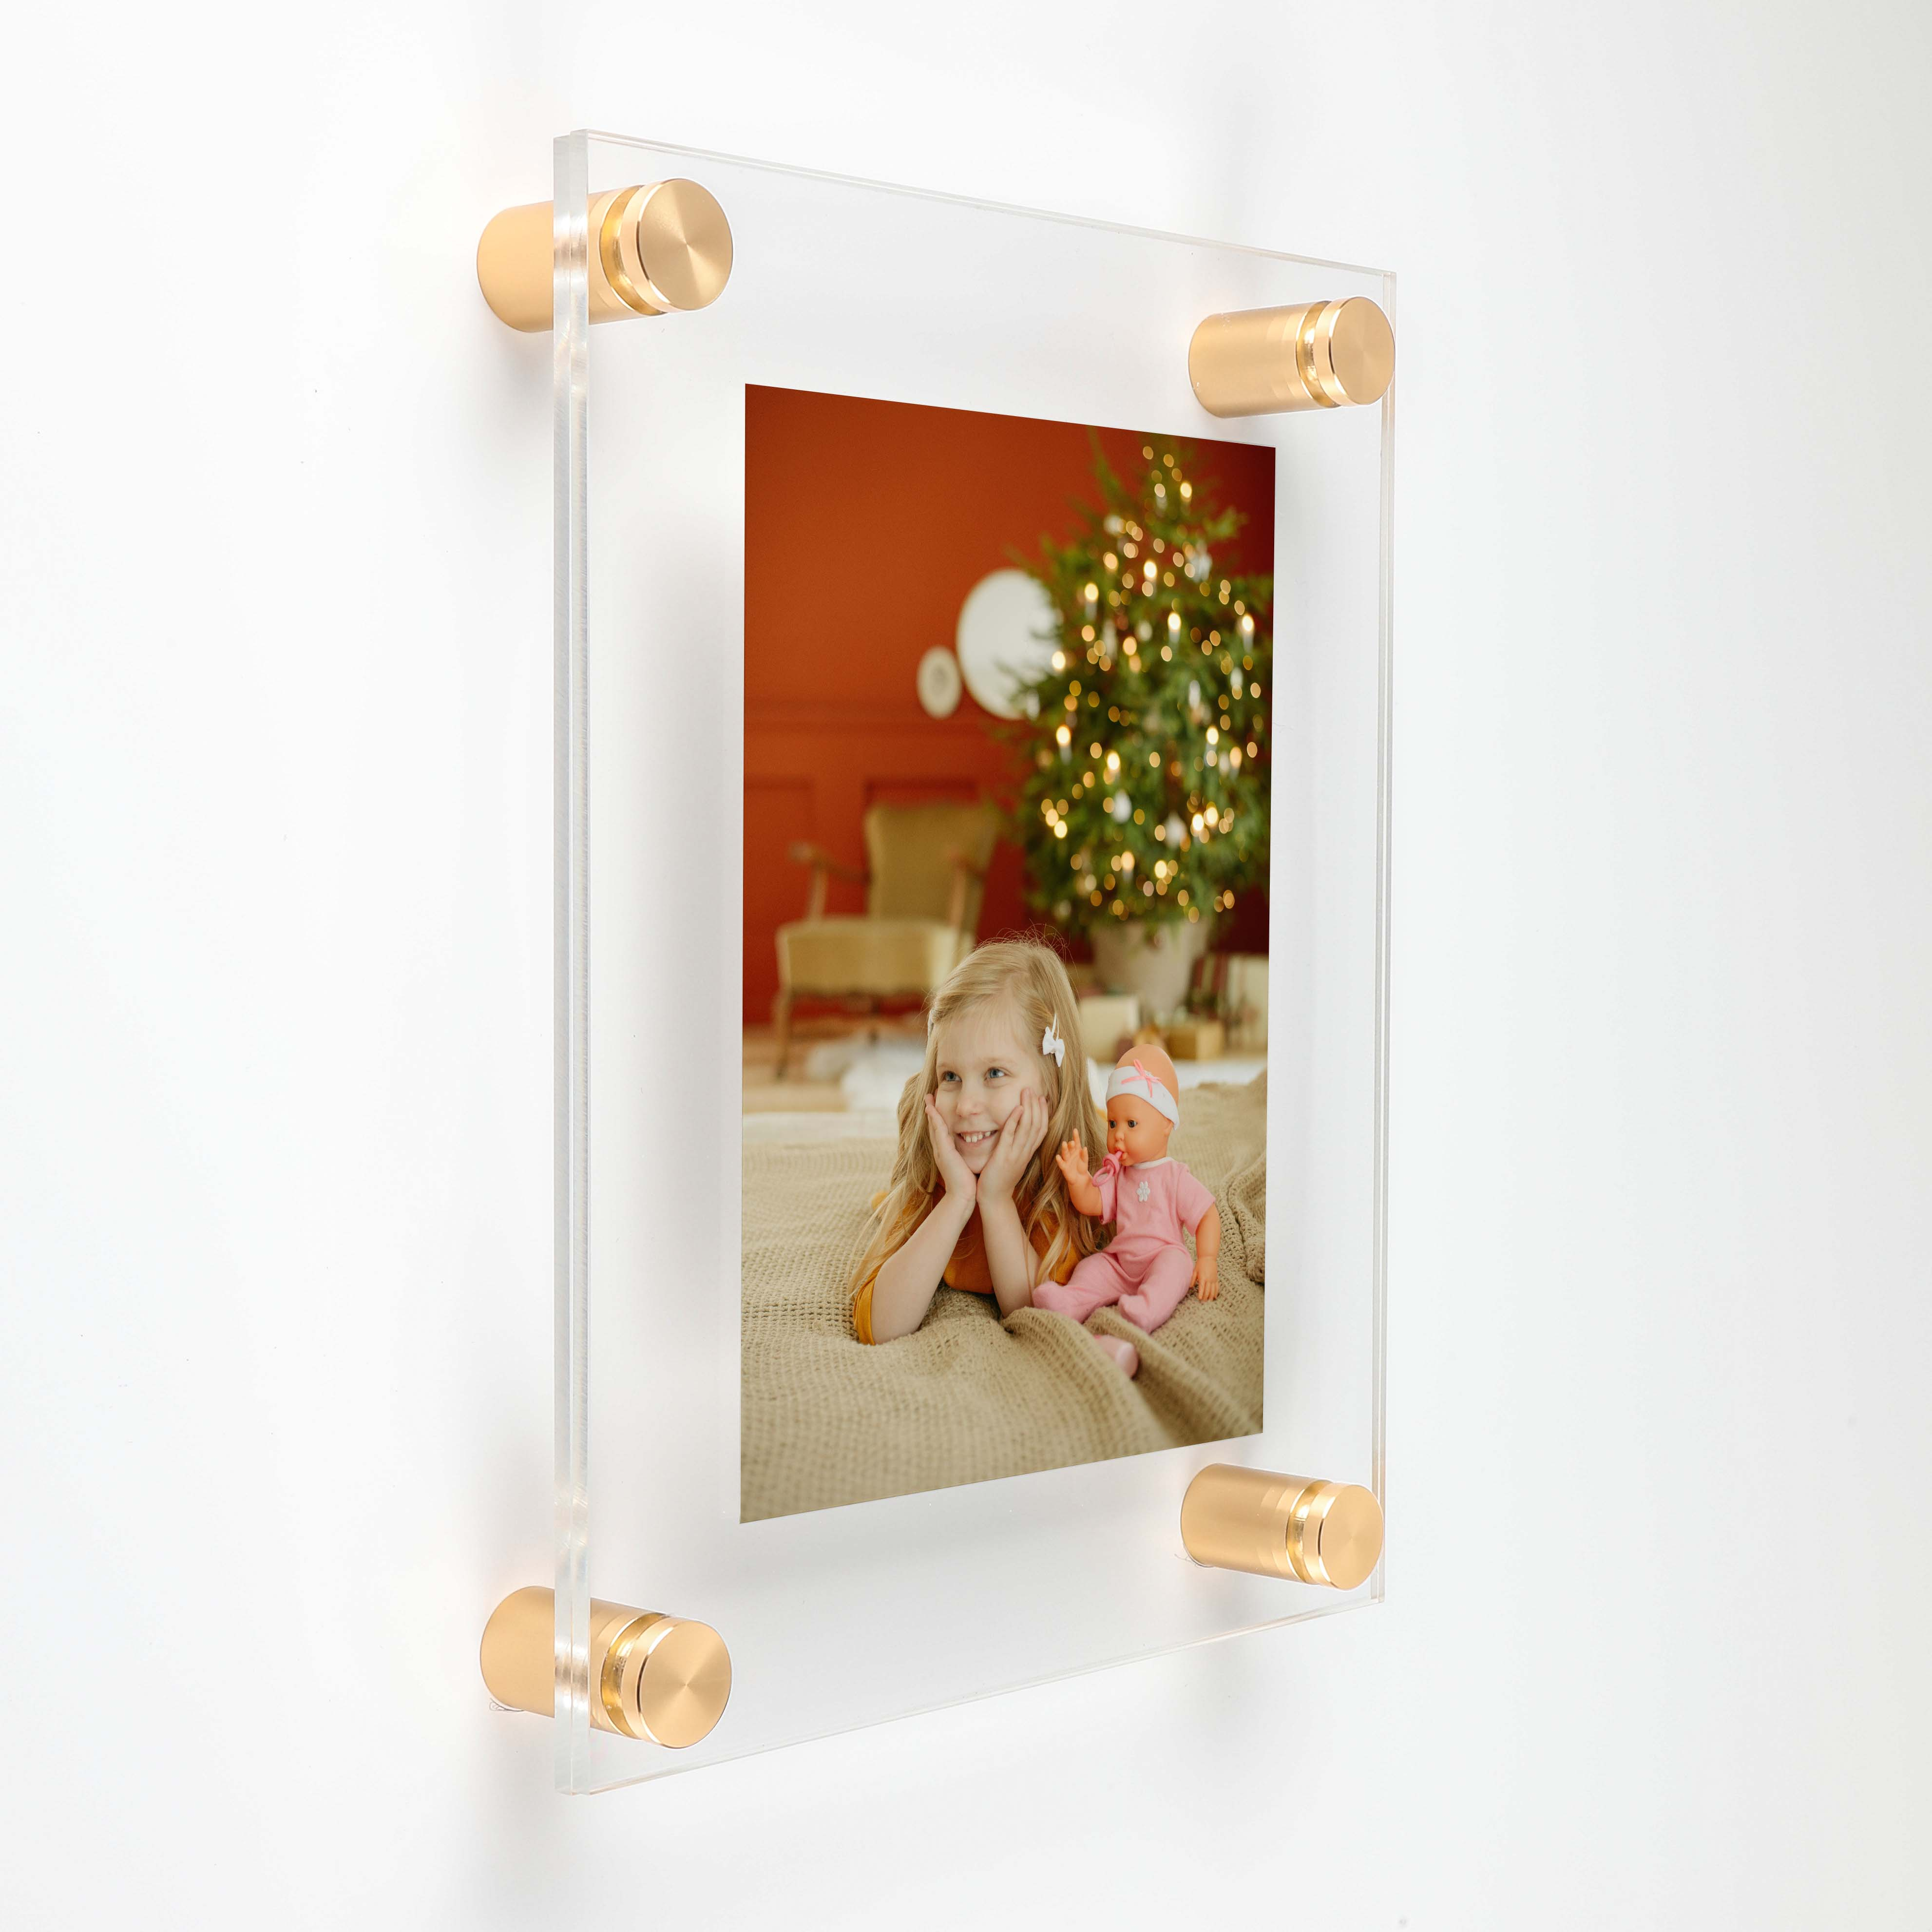 (2) 7-1/2'' x 9-1/2'' Clear Acrylics , Pre-Drilled With Polished Edges (Thick 1/8'' each), Wall Frame with (4) 5/8'' x 3/4'' Champagne Anodized Aluminum Standoffs includes Screws and Anchors